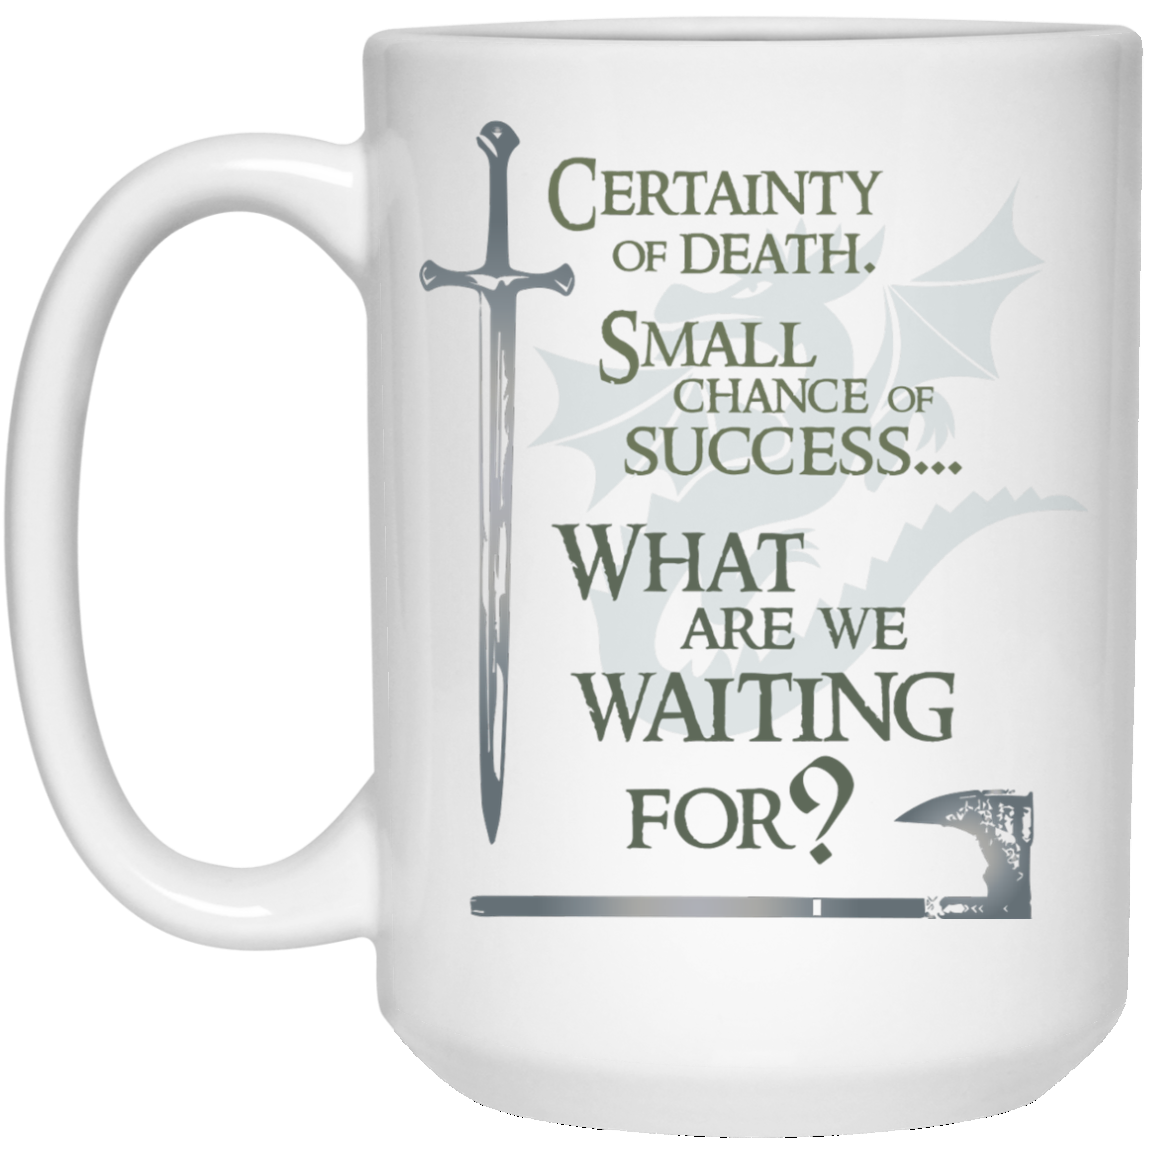 Lord of the Rings mug: And that must be you